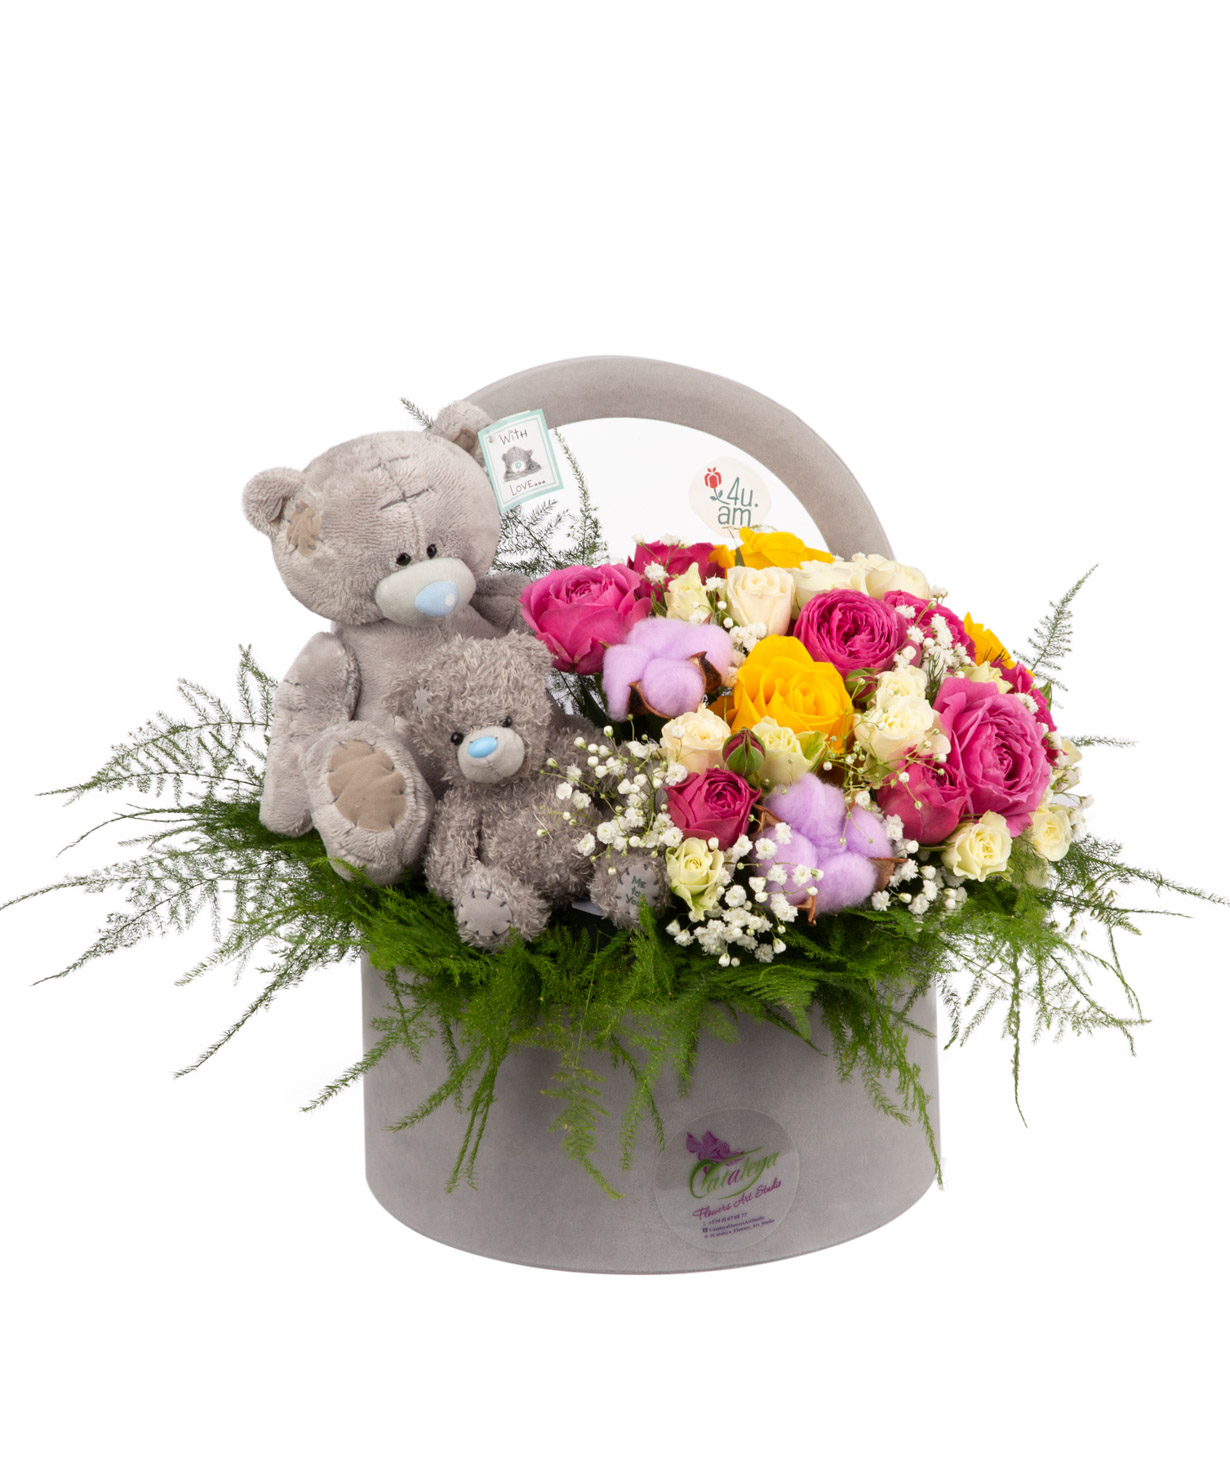 Arrangement `Borgarnes` with flowers and soft bear